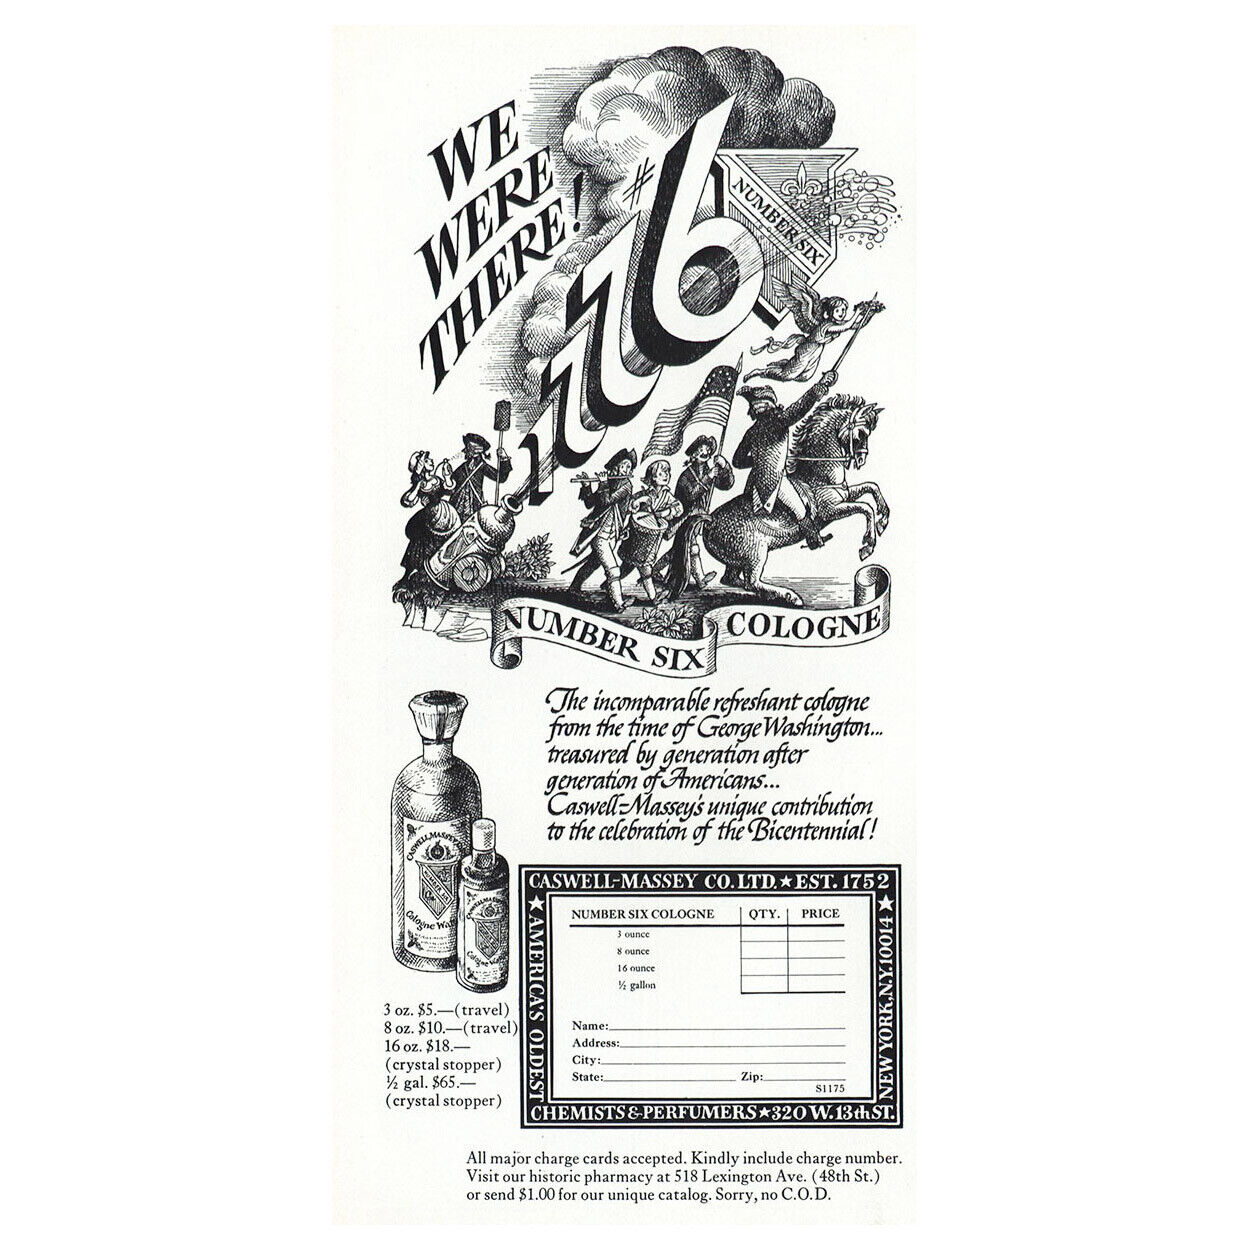 1975 Summer Six Cologne: We Were There 1776 Vintage Print Ad